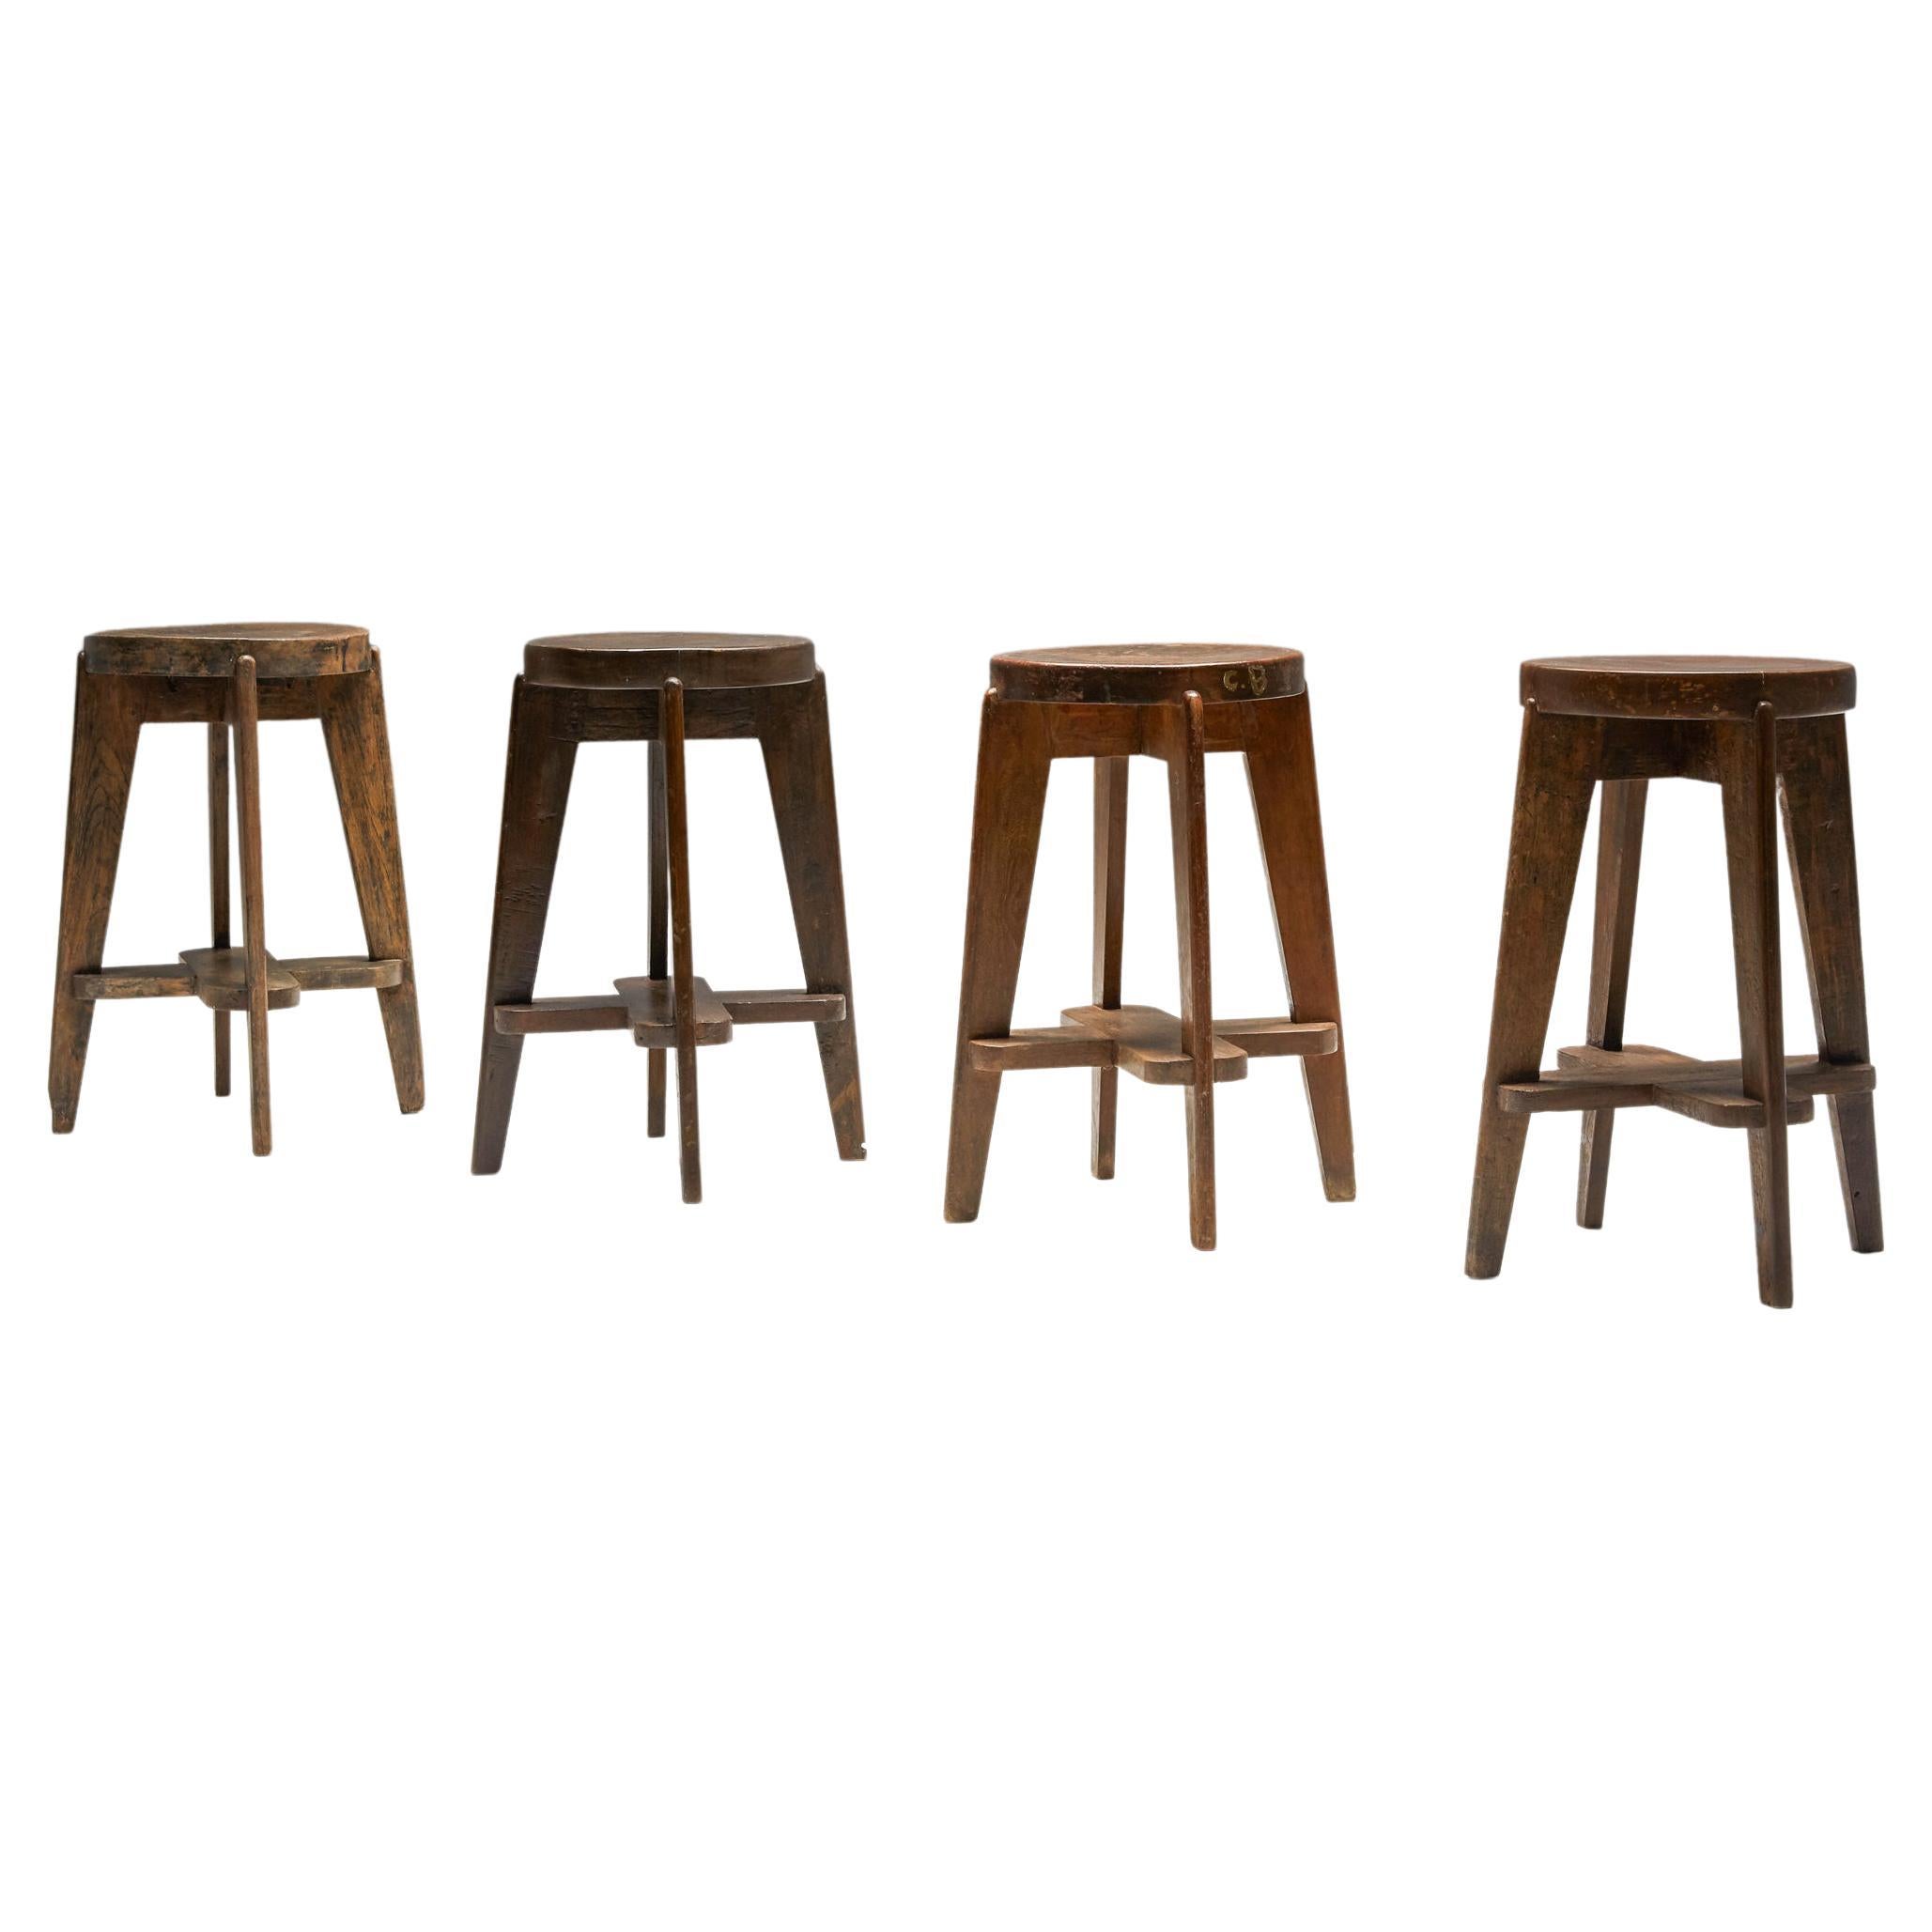 Pierre Jeanneret Chandigarh Stools 'CB', Postmodern influenced by Le Corbusier 